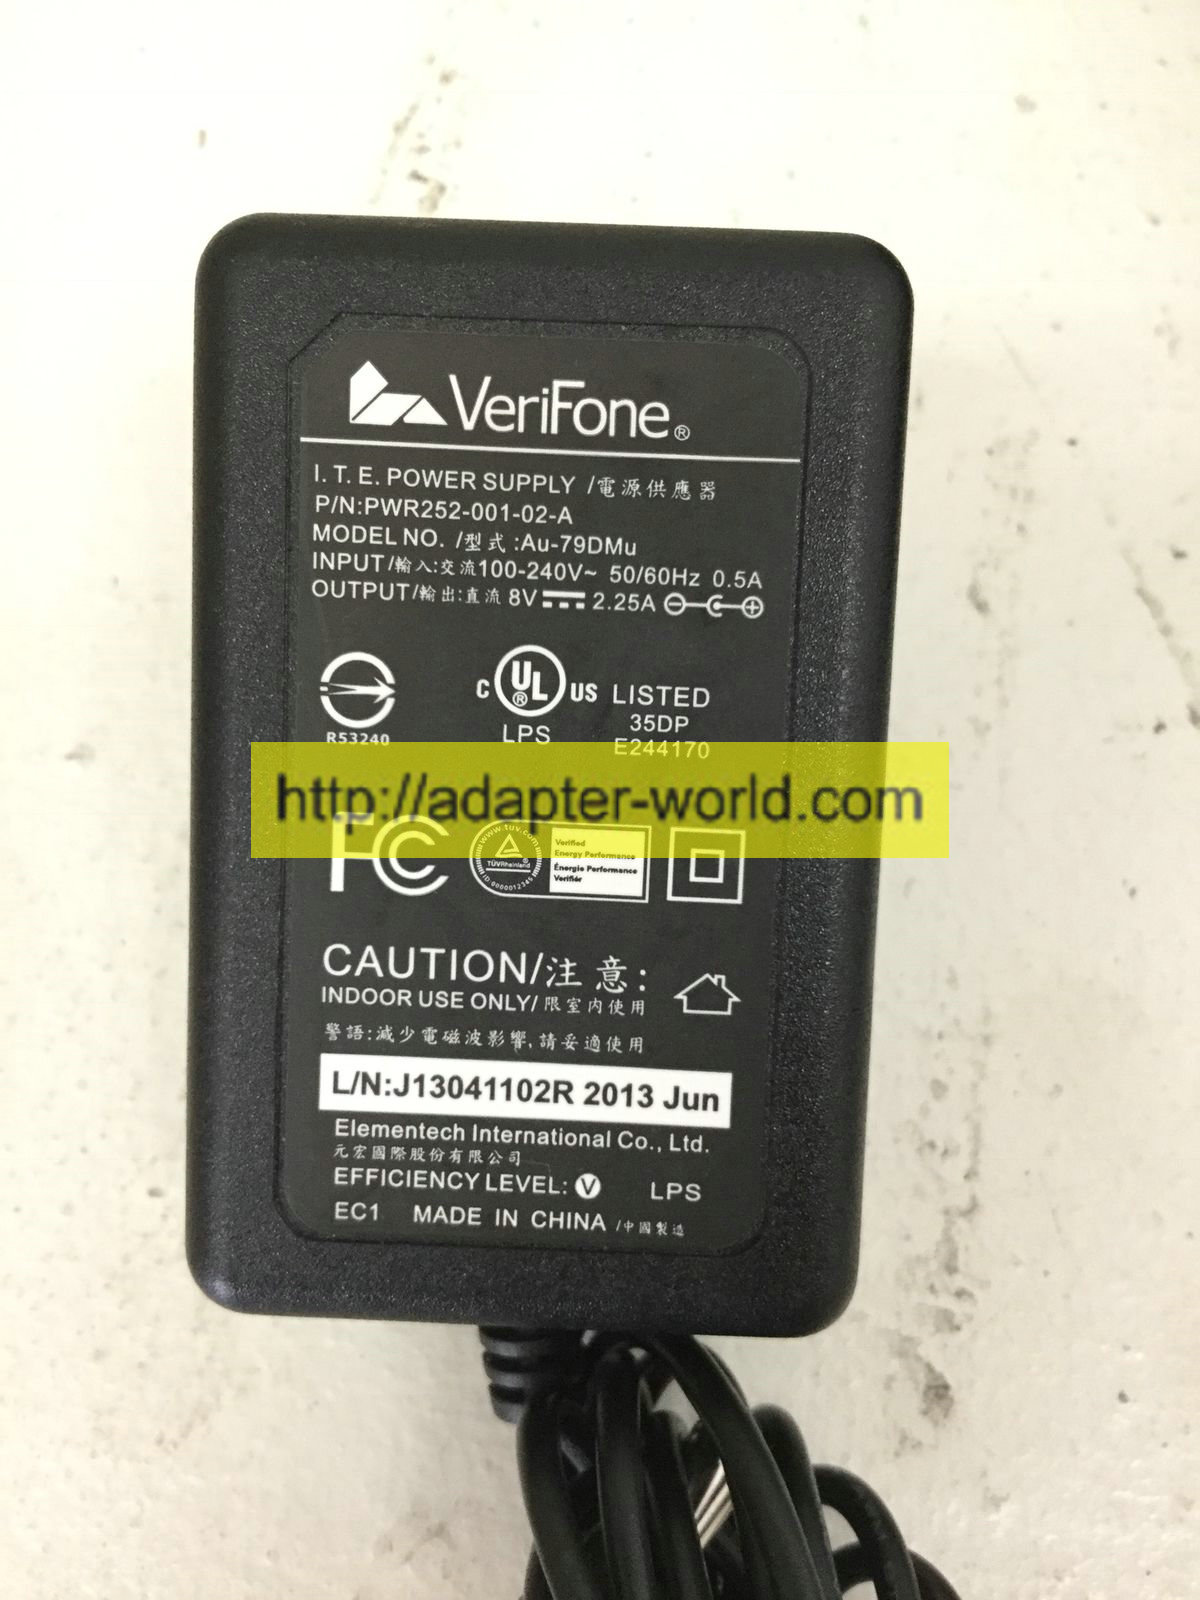 *100% Brand NEW* Verifone 8V 2.25A Adapter PWR252-001-02-A Model Au-79DMu Power Supply Charger Free shipping!